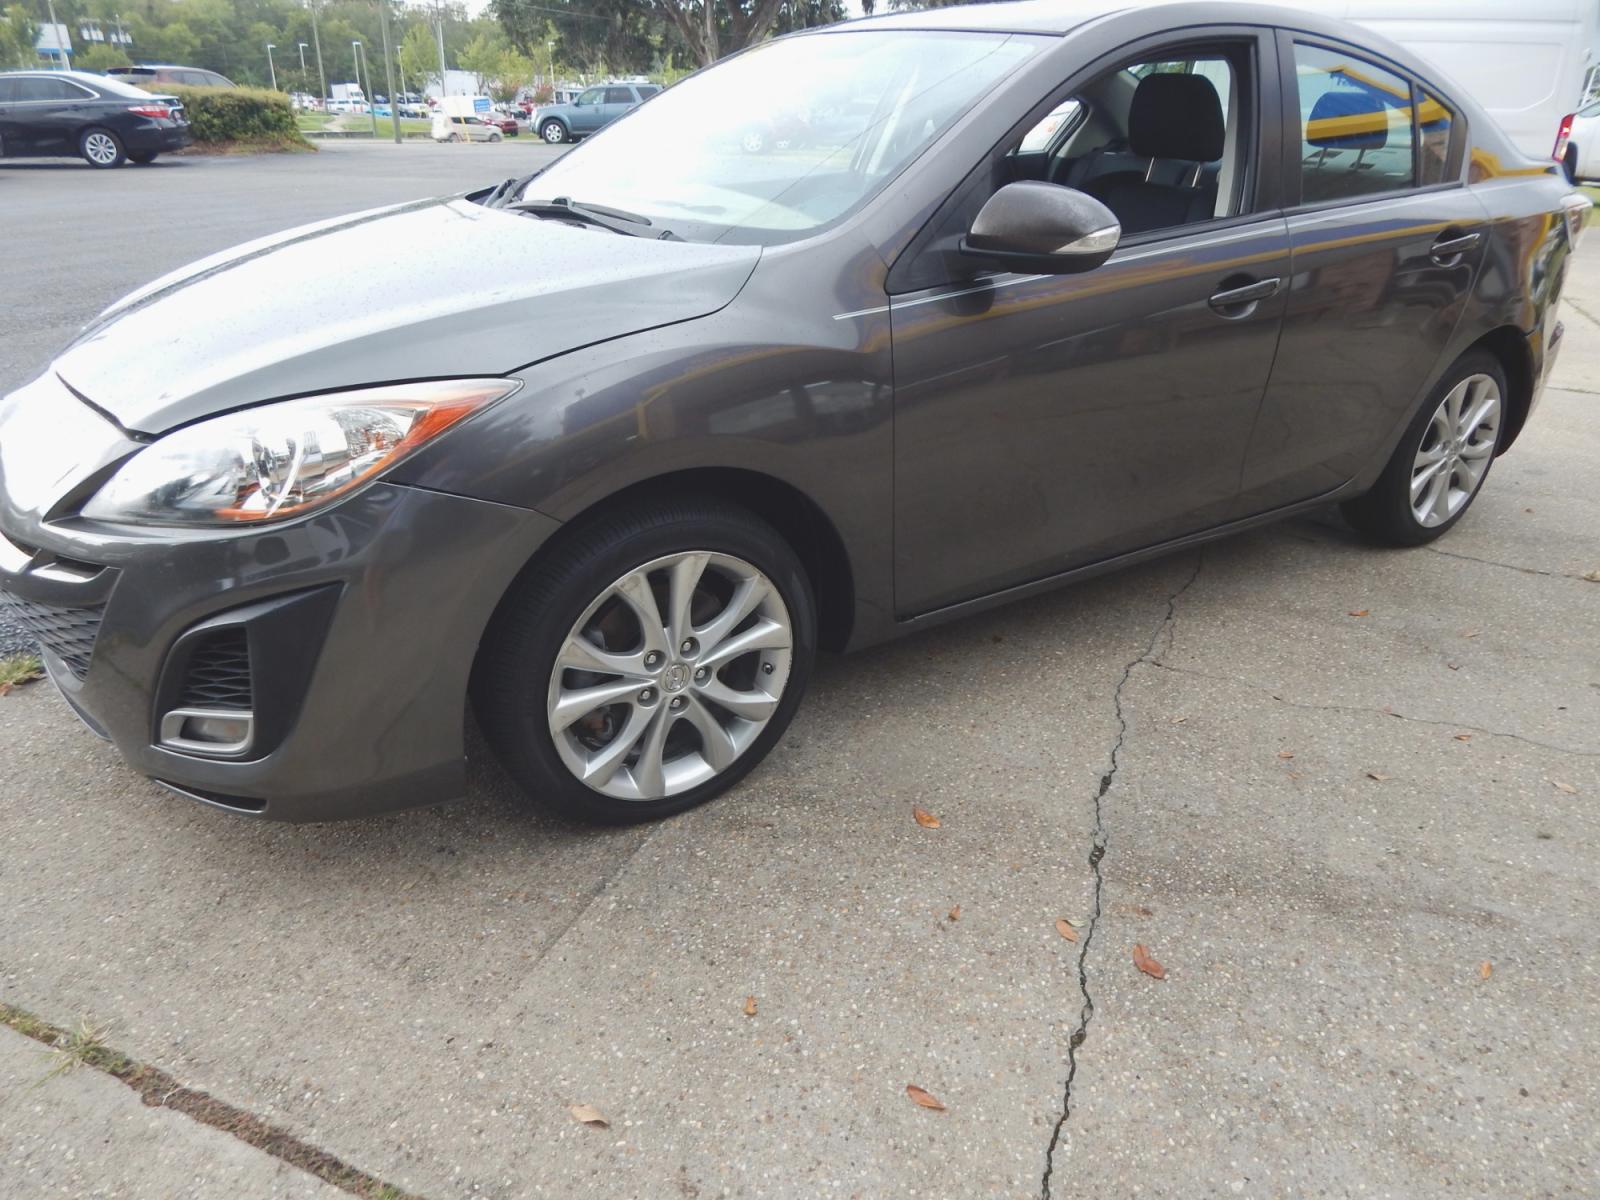 2010 Charcoal Metallic /Gray Mazda 3S sedan 3S with an 2.5l-4 cyl. engine, Automatic transmission, located at 3120 W Tennessee St, Tallahassee, FL, 32304-1002, (850) 575-6702, 30.458841, -84.349648 - Used Car Supermarket is proud to present you with this loaded immaculate 2010 Mazda 3S sedan with low miles. Used Car Supermarket prides itself in offering you the finest pre-owned vehicle in Tallahassee. Used Car Supermarket has been locally family owned and operated for over 48 years. Our 3S sedan - Photo #1